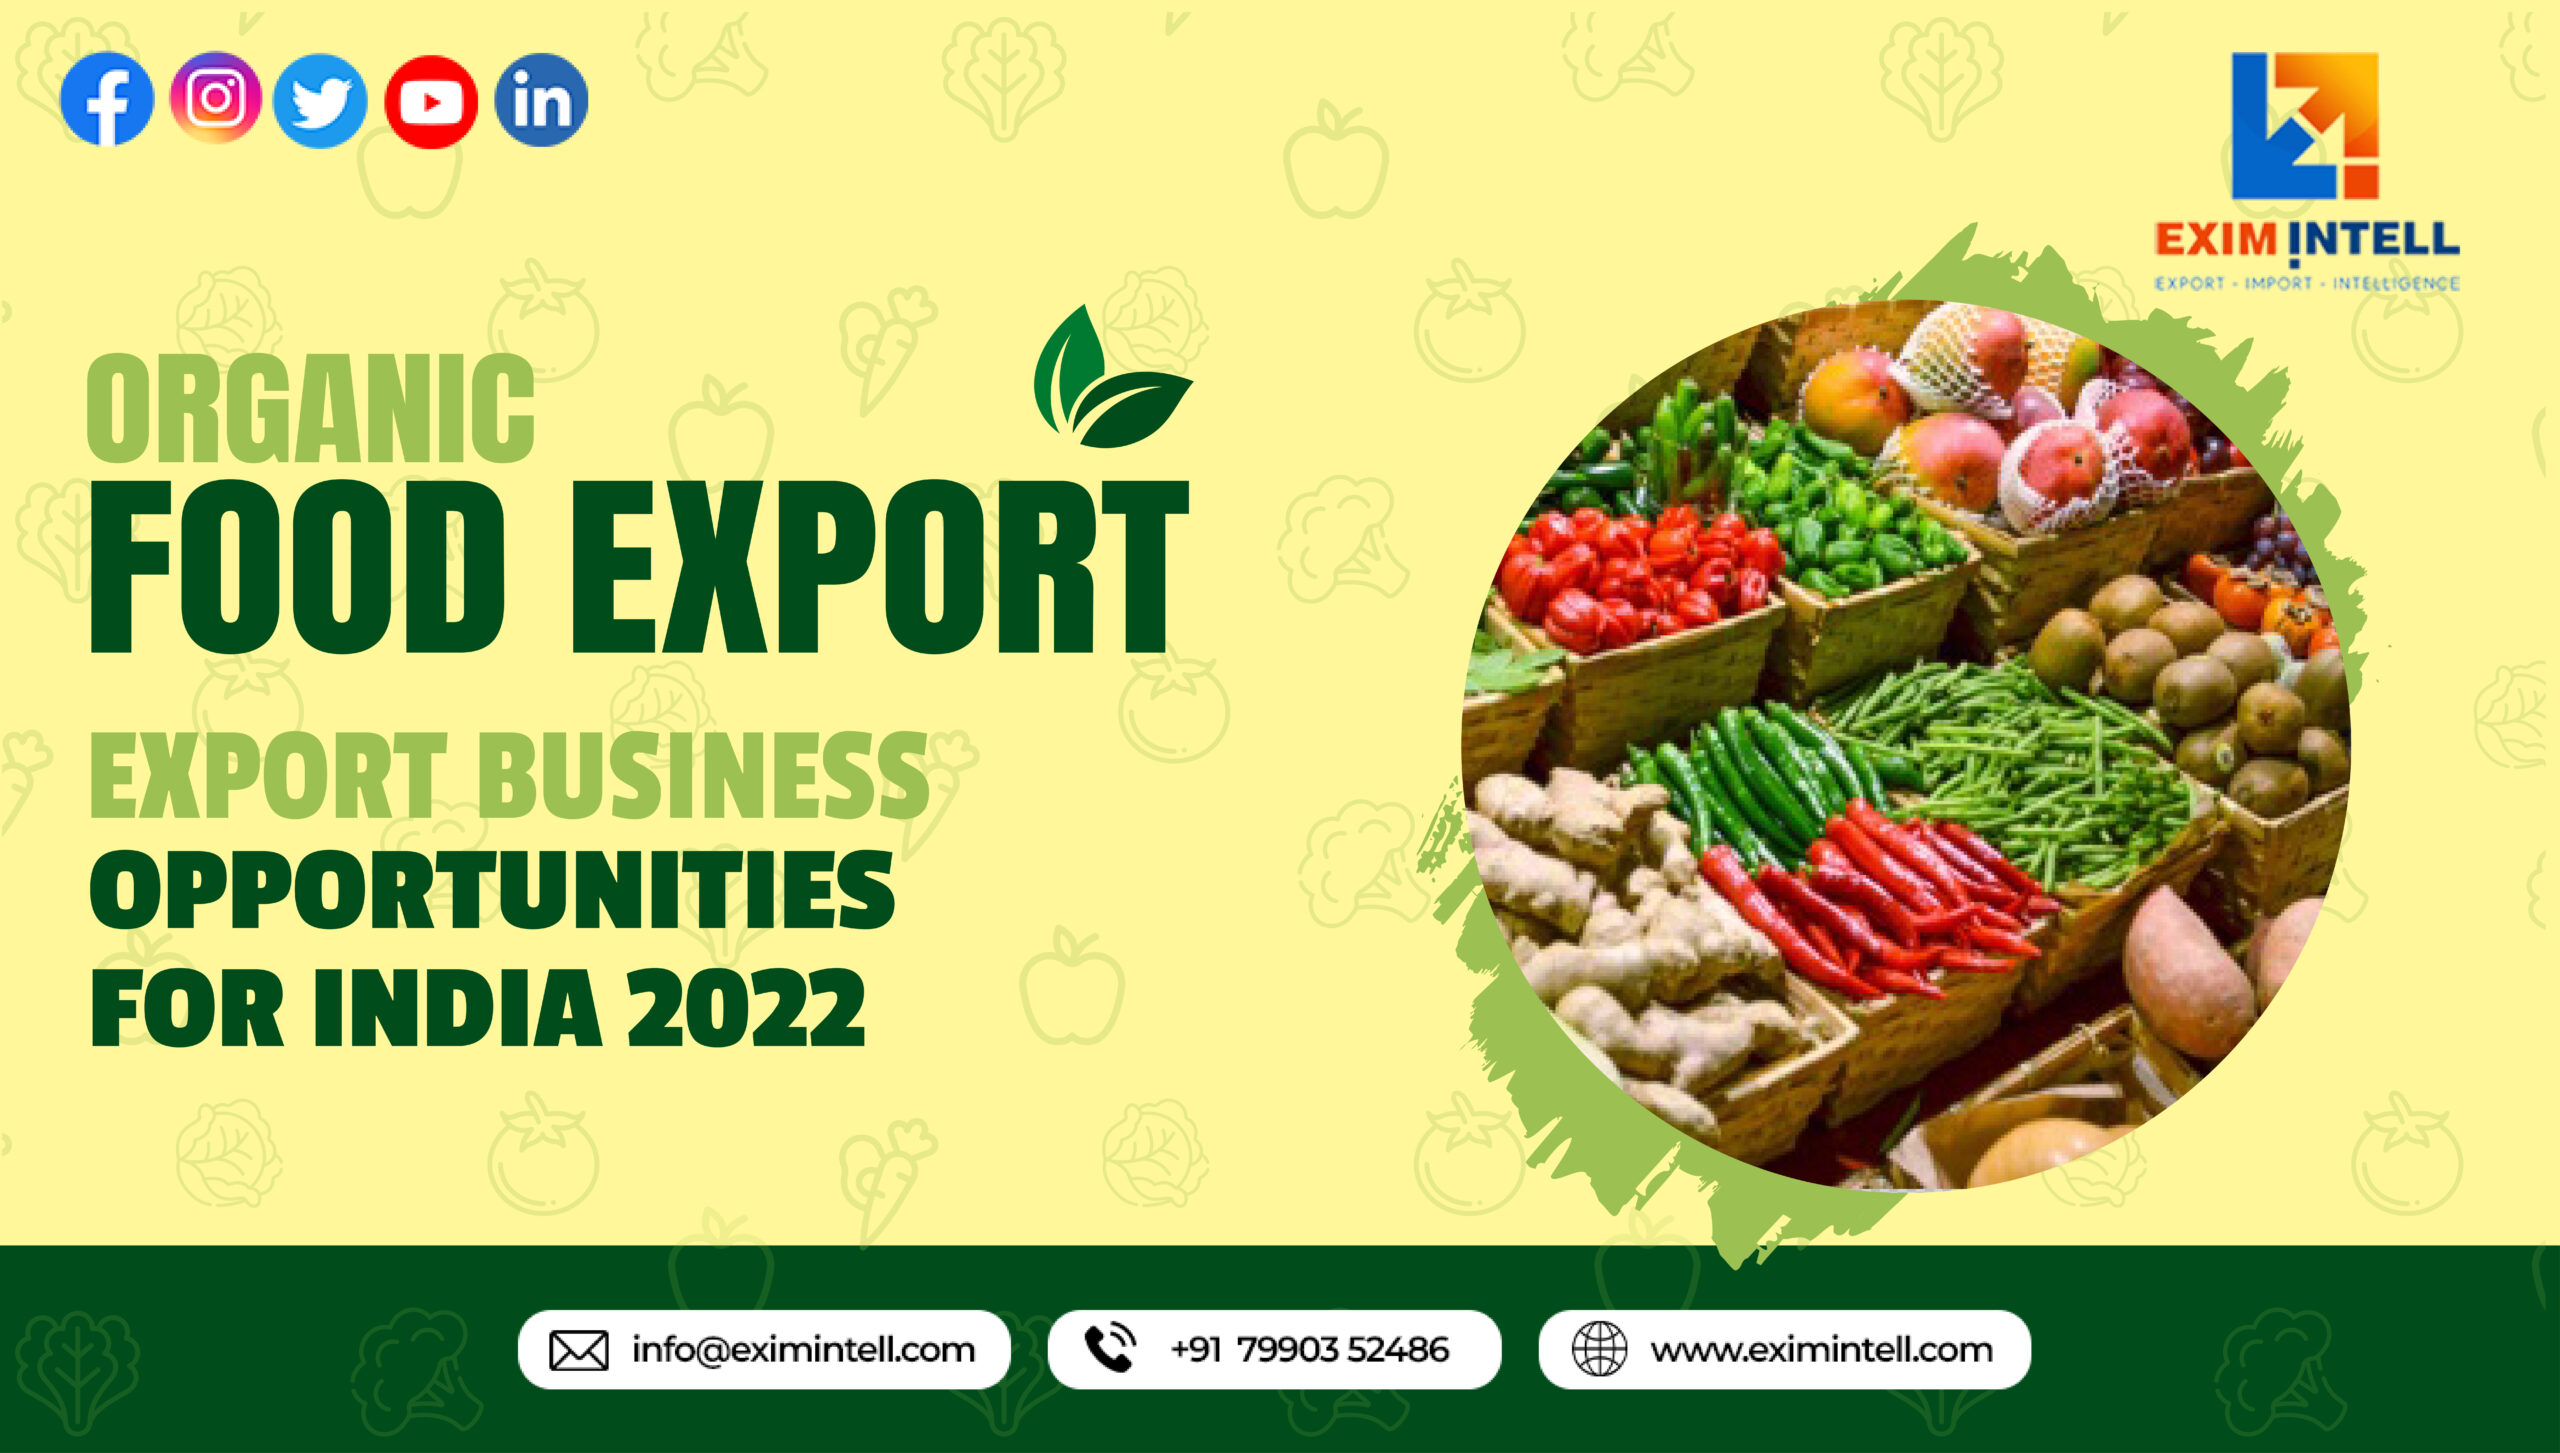 Export Business Opportunities for India in 2022: Organic Food Export